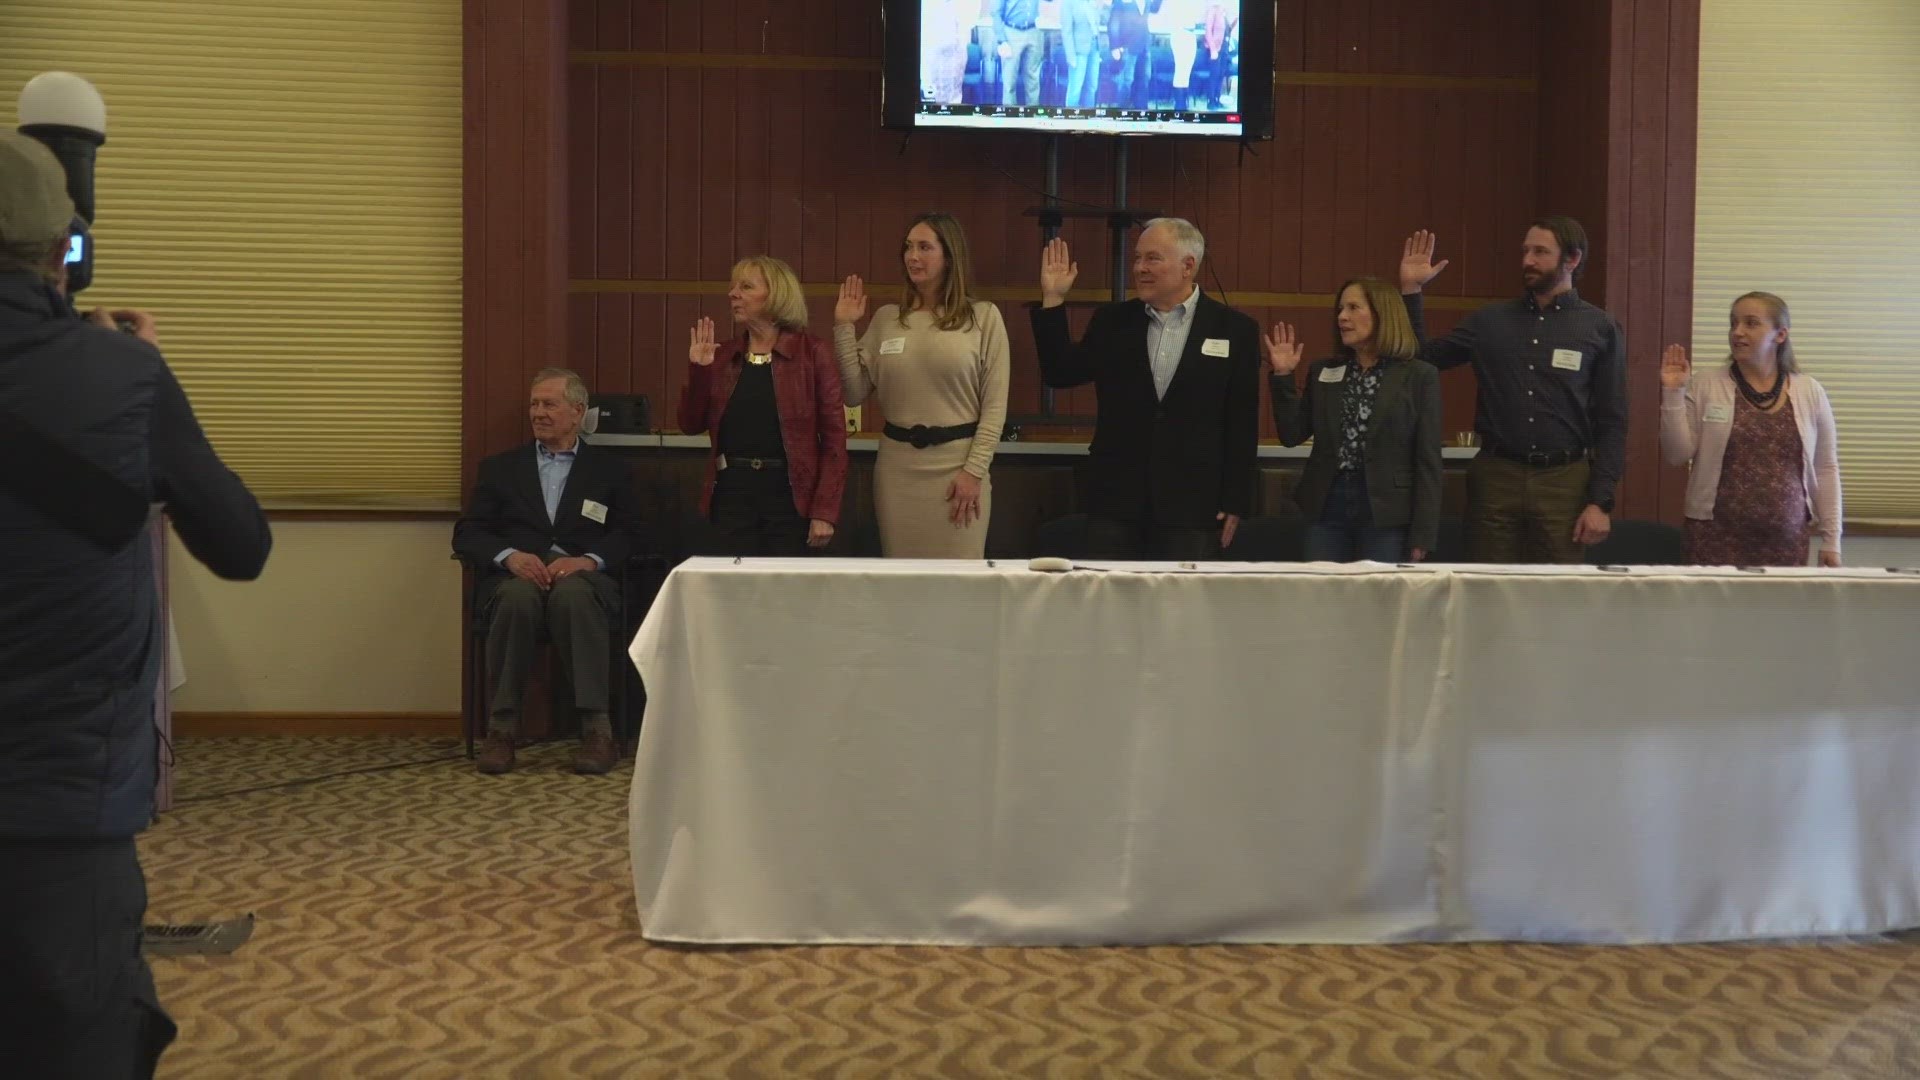 Keystone is officially a town with the swearing in of its first ever mayor and 6-person town council.